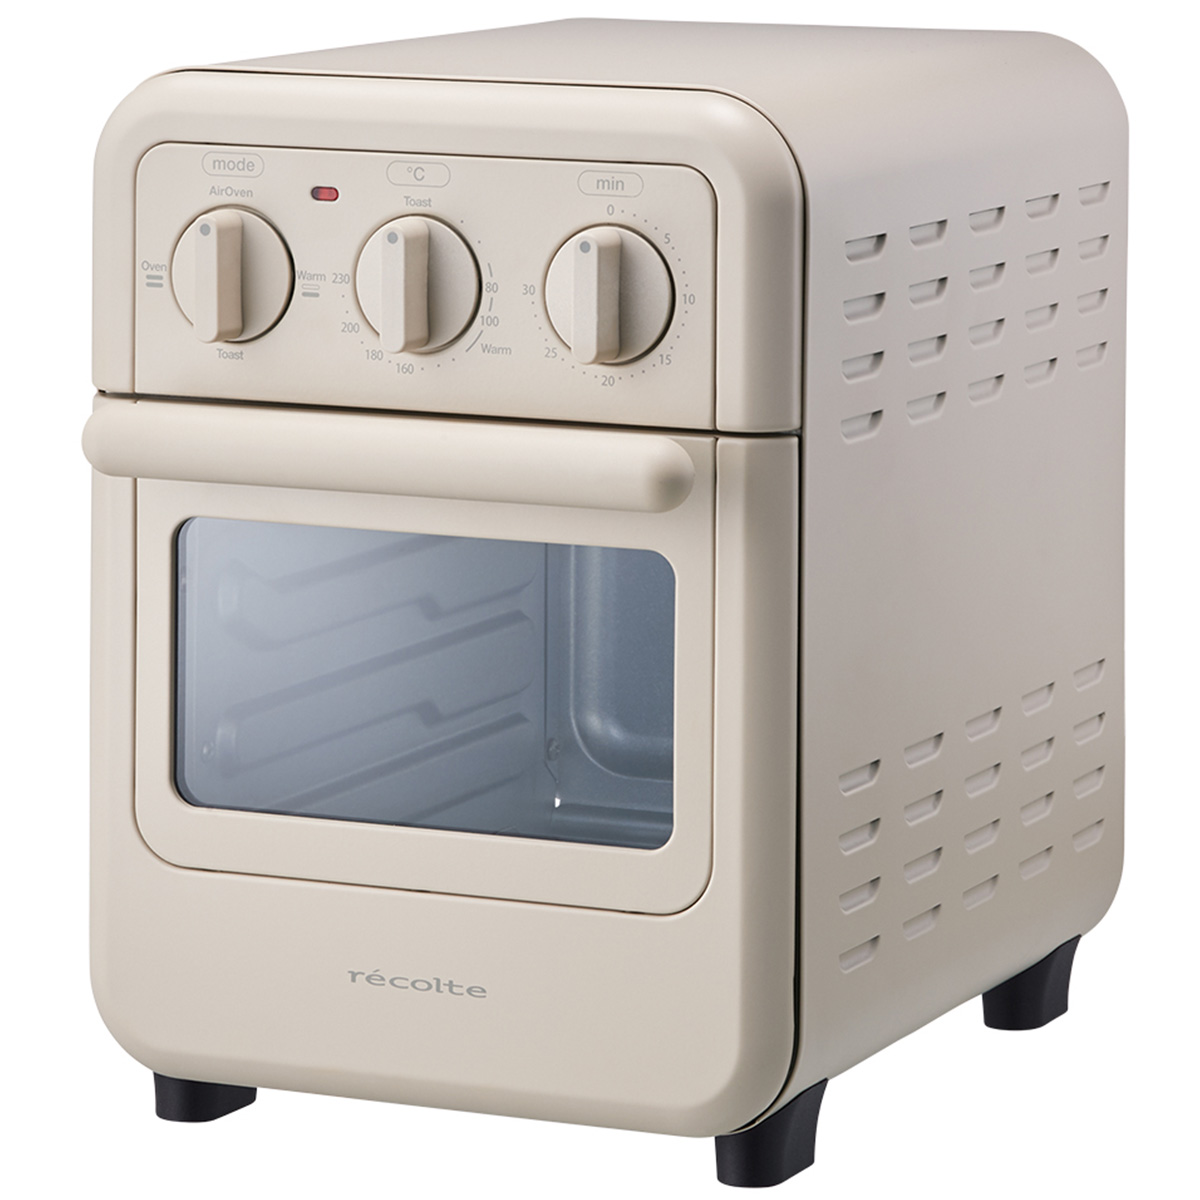 Air Oven Toaster エアーオーブントースター クリームホワイト